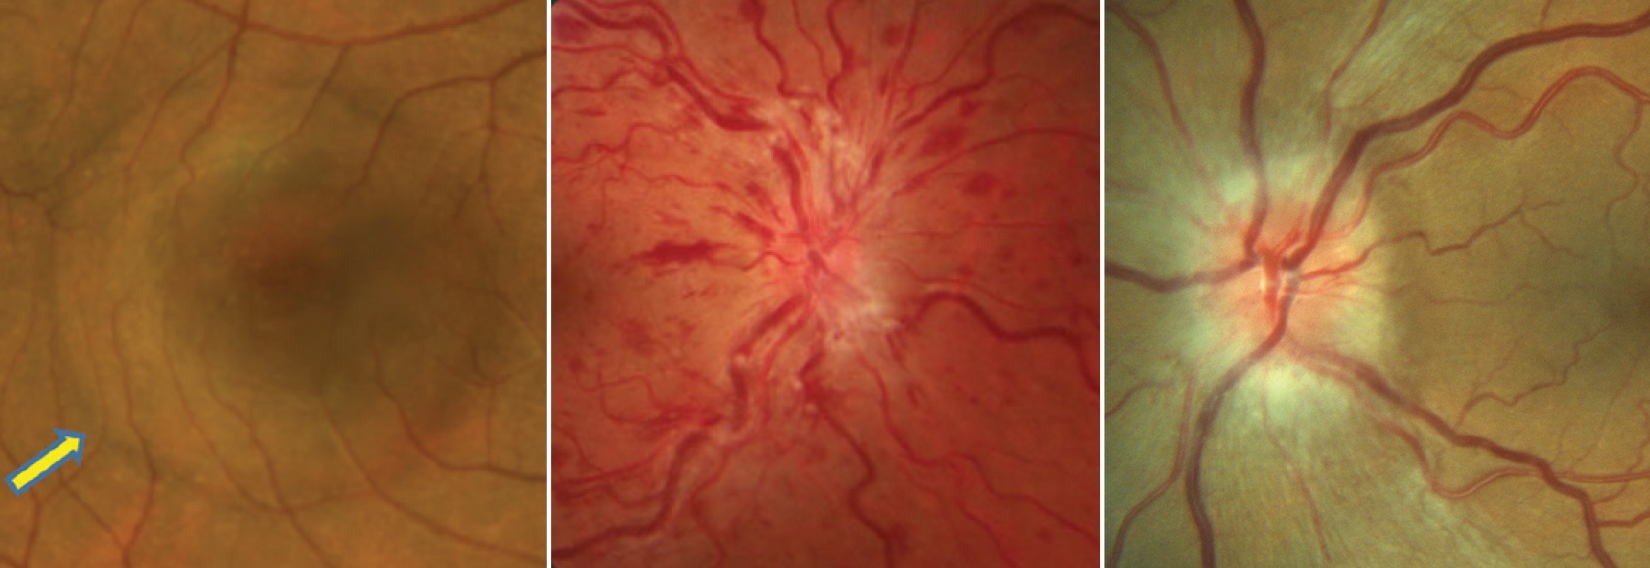 Study finds elevated risks of (L to R) serous retinal detachment, retinal vein occlusion and ischemic optic neuropathy in patients using ED drugs. 